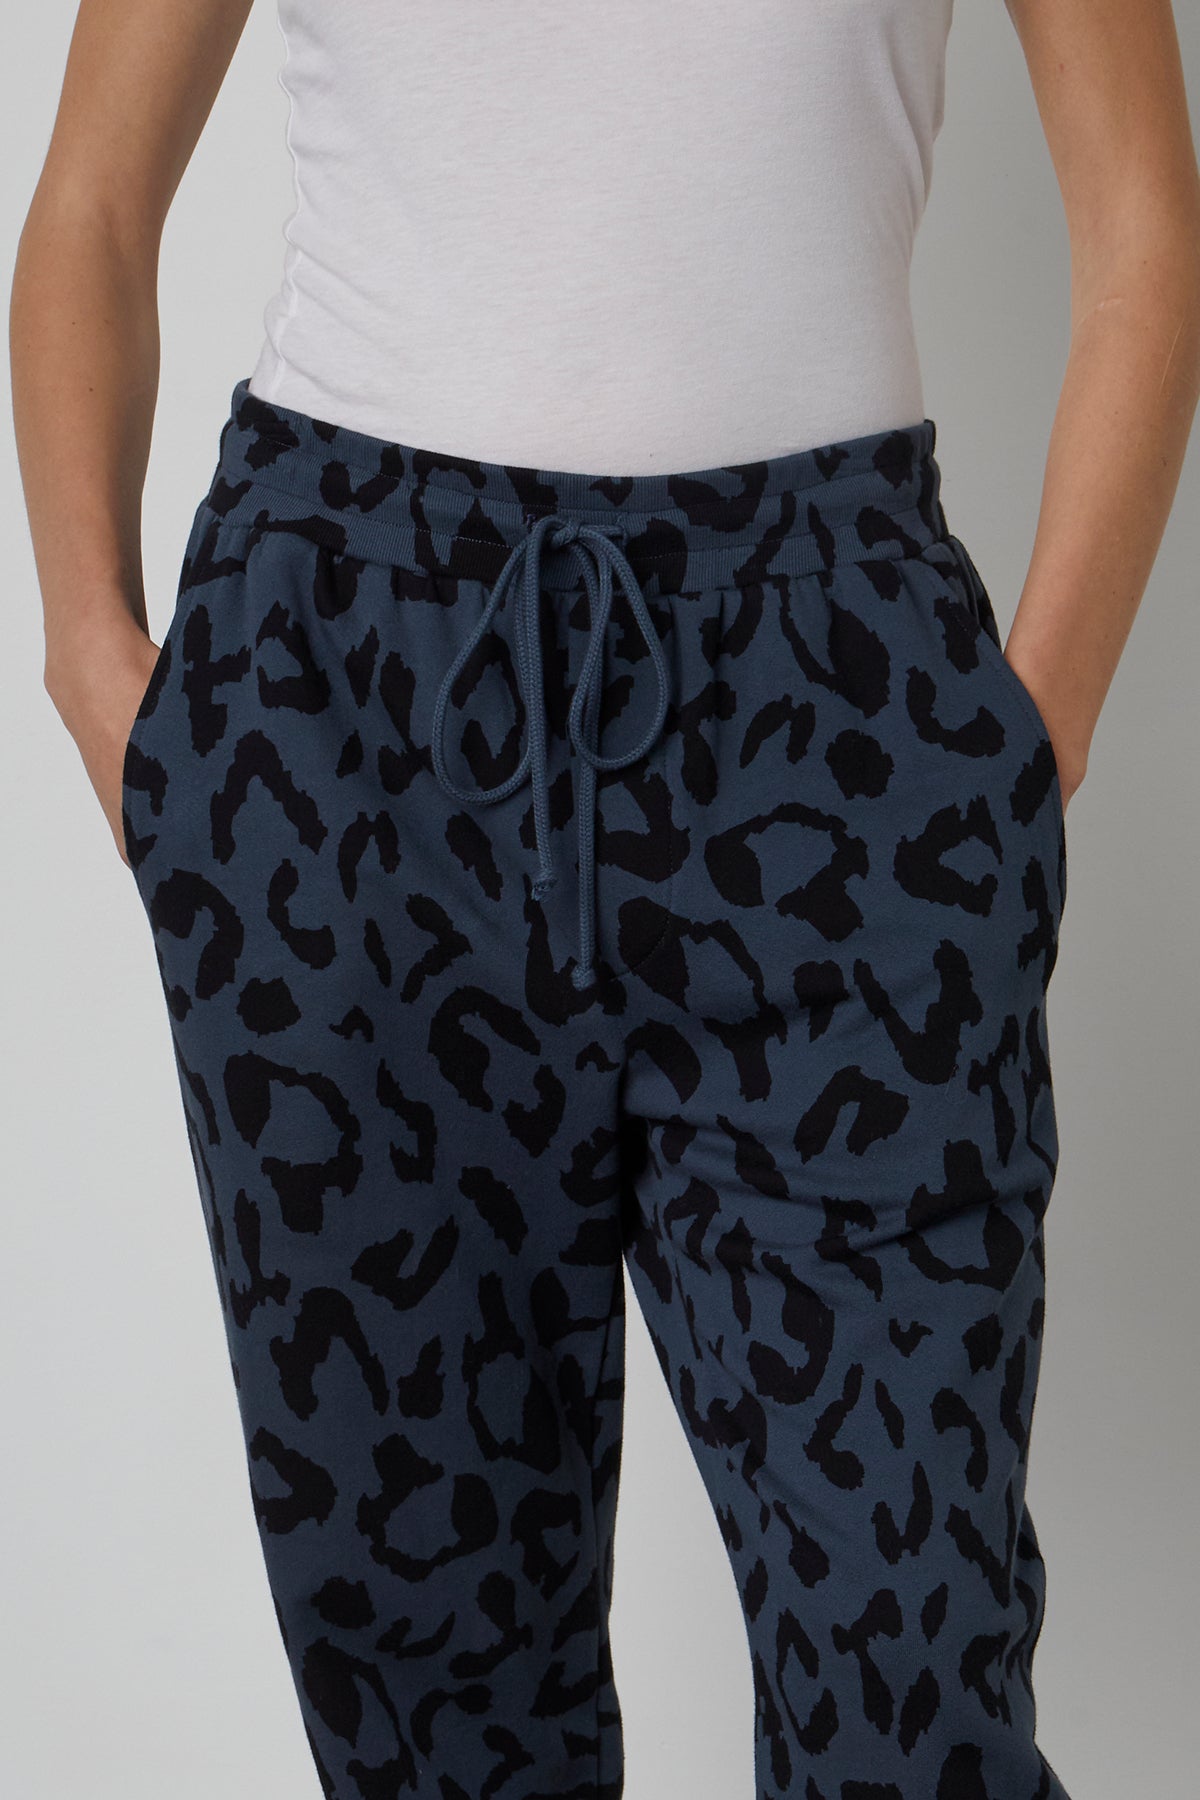   A woman donning the Velvet by Graham & Spencer GWEN PRINTED JOGGER, embodying a low-key jogger style in the form of black and blue leopard print jogging pants. 